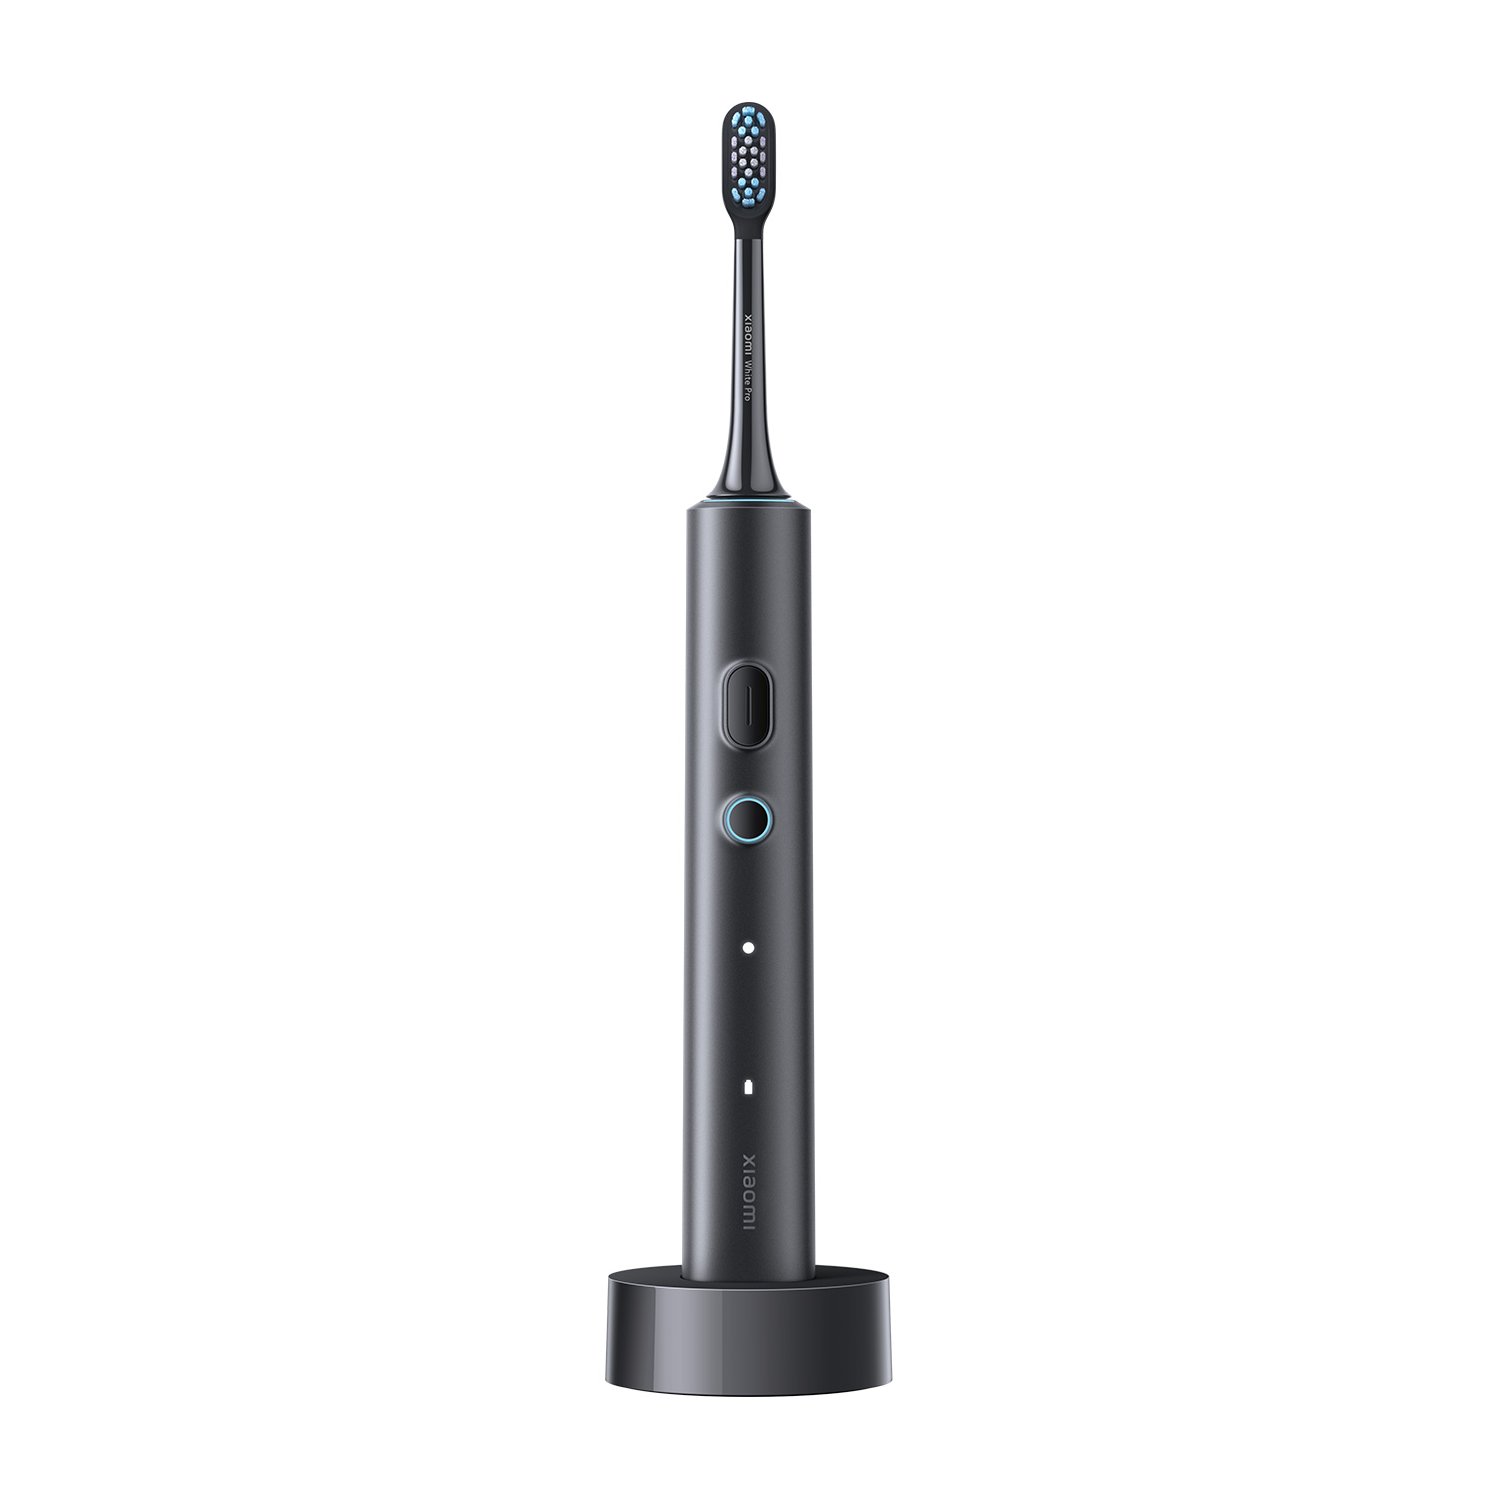 Xiaomi Smart Electric Toothbrush T501, , large image number 1